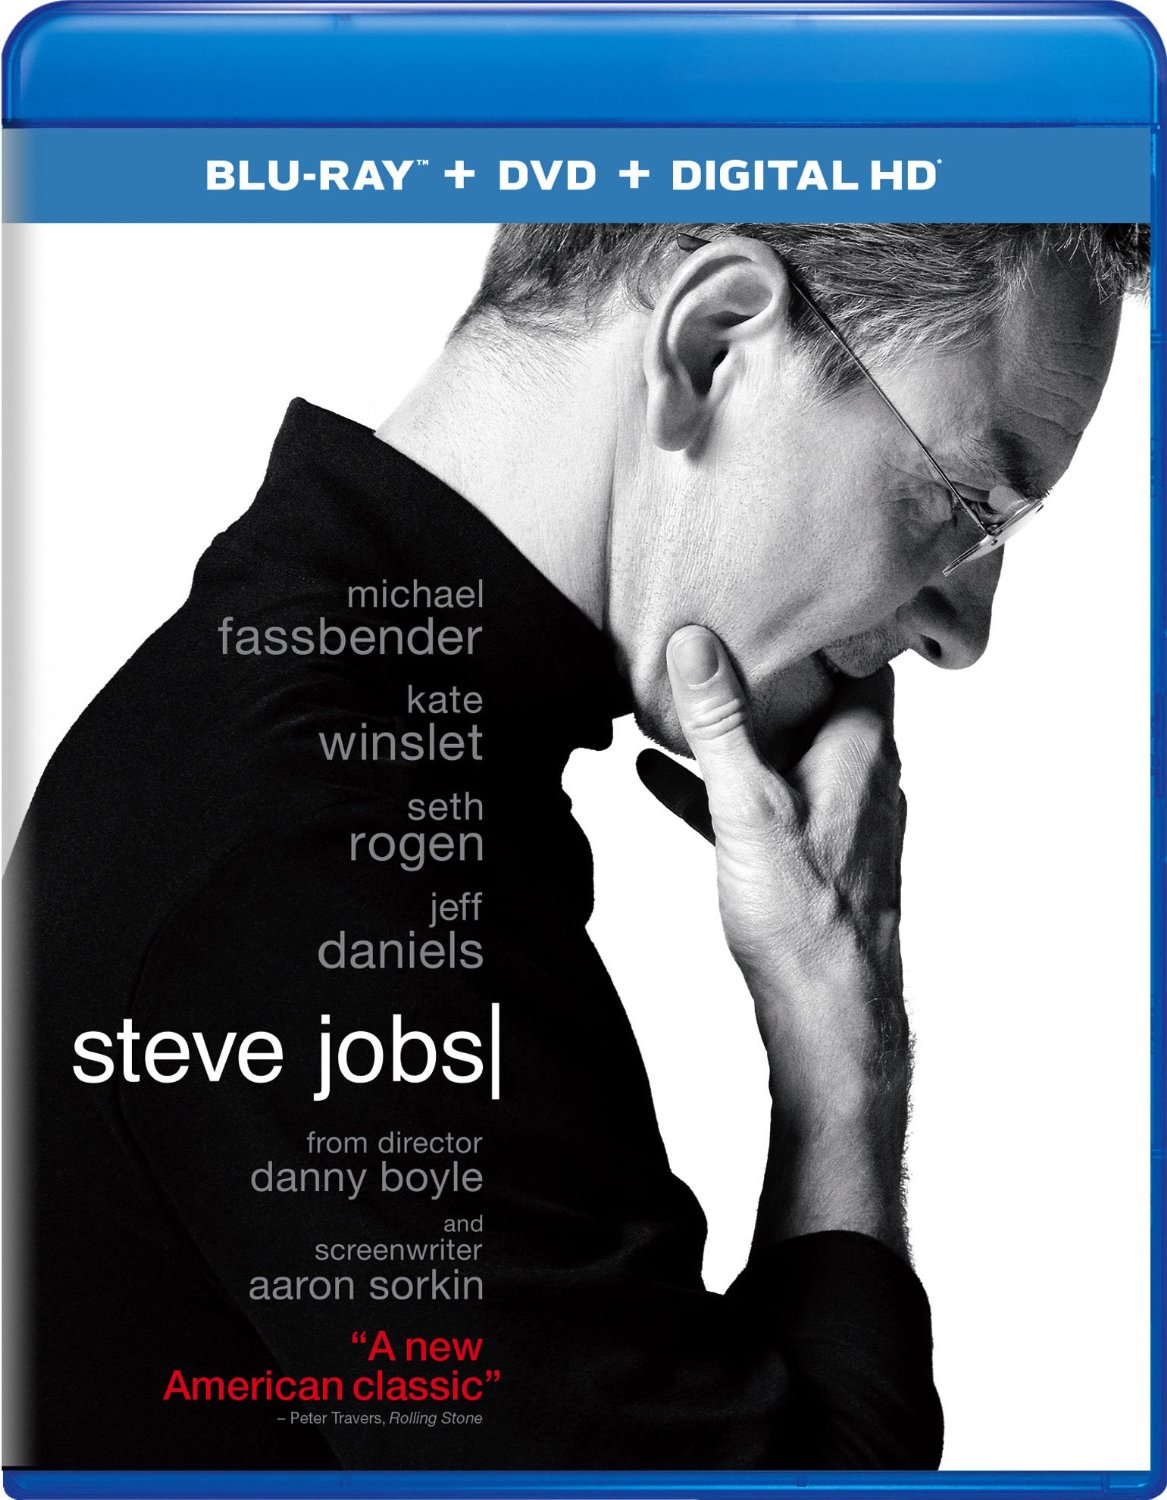 Steve Jobs Movie Now Available on Blu-ray and DVD